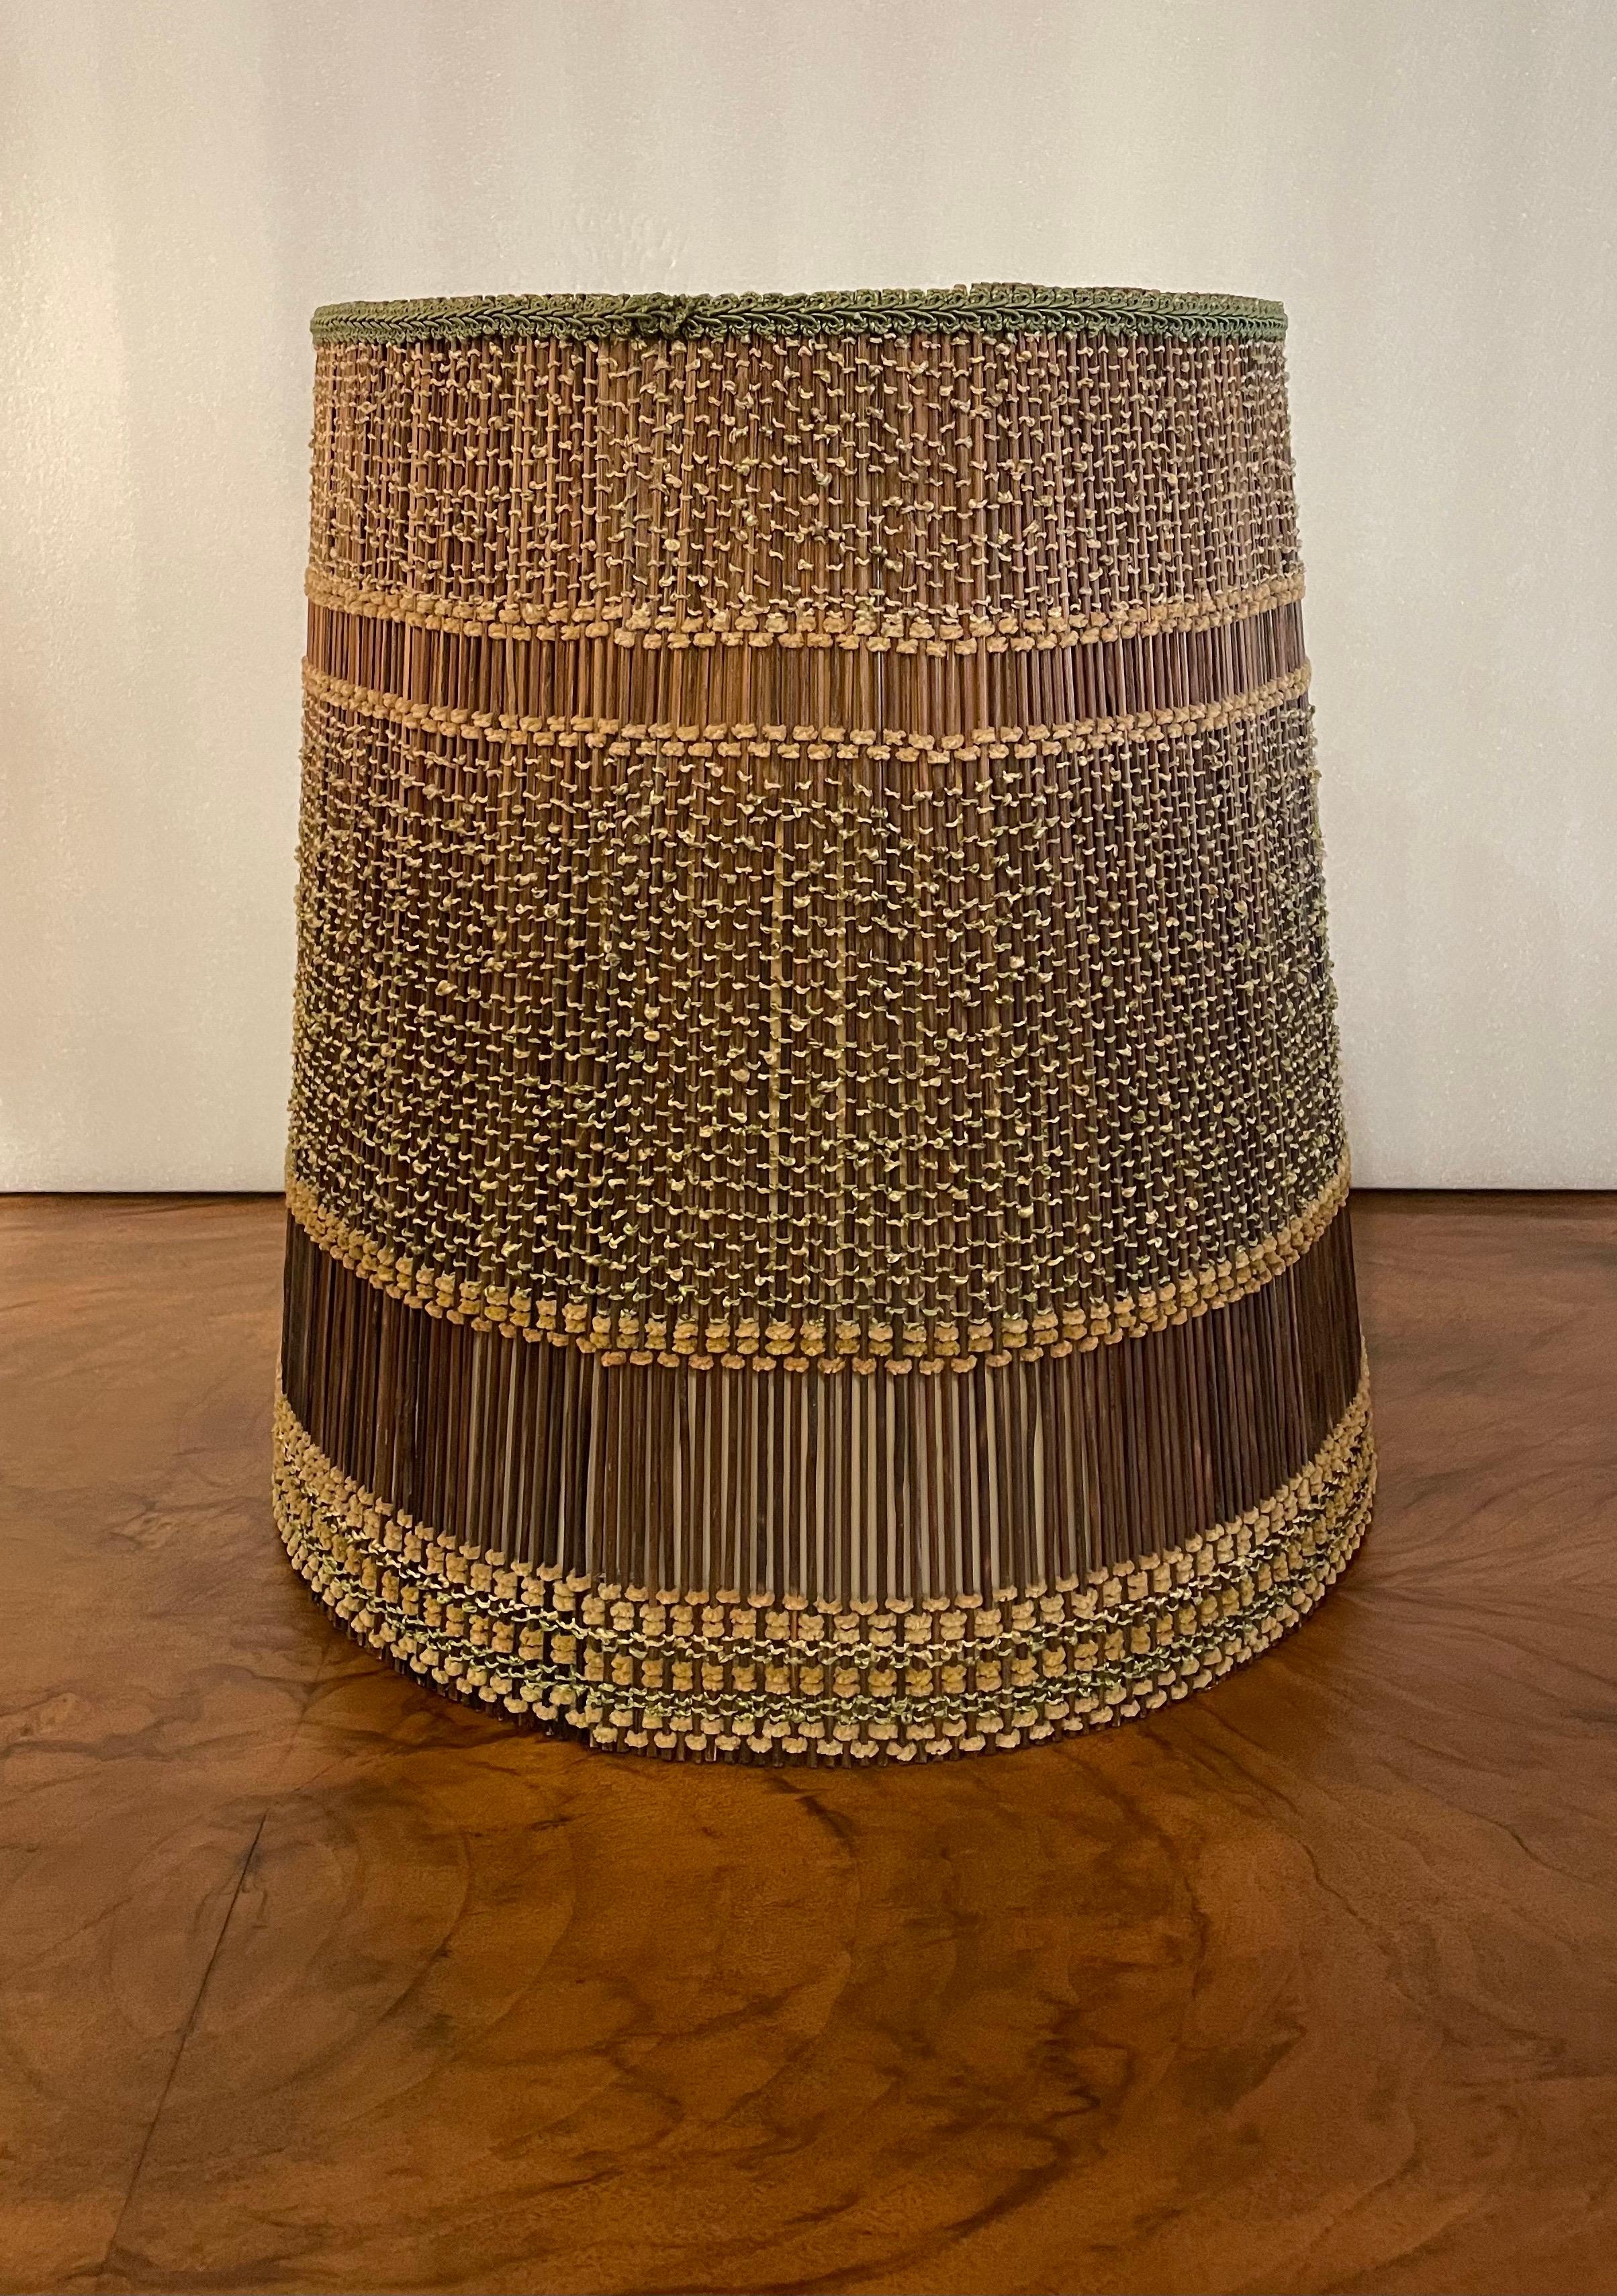 Single textured lampshade by Maria Kipp. Wood & Fabric. The outside looks good but the inner plastic its cracked and missing pieces doesnt affect the structure but needs to be mentioned the shade its sold AS/IS condition.

Measures: Top is: 13